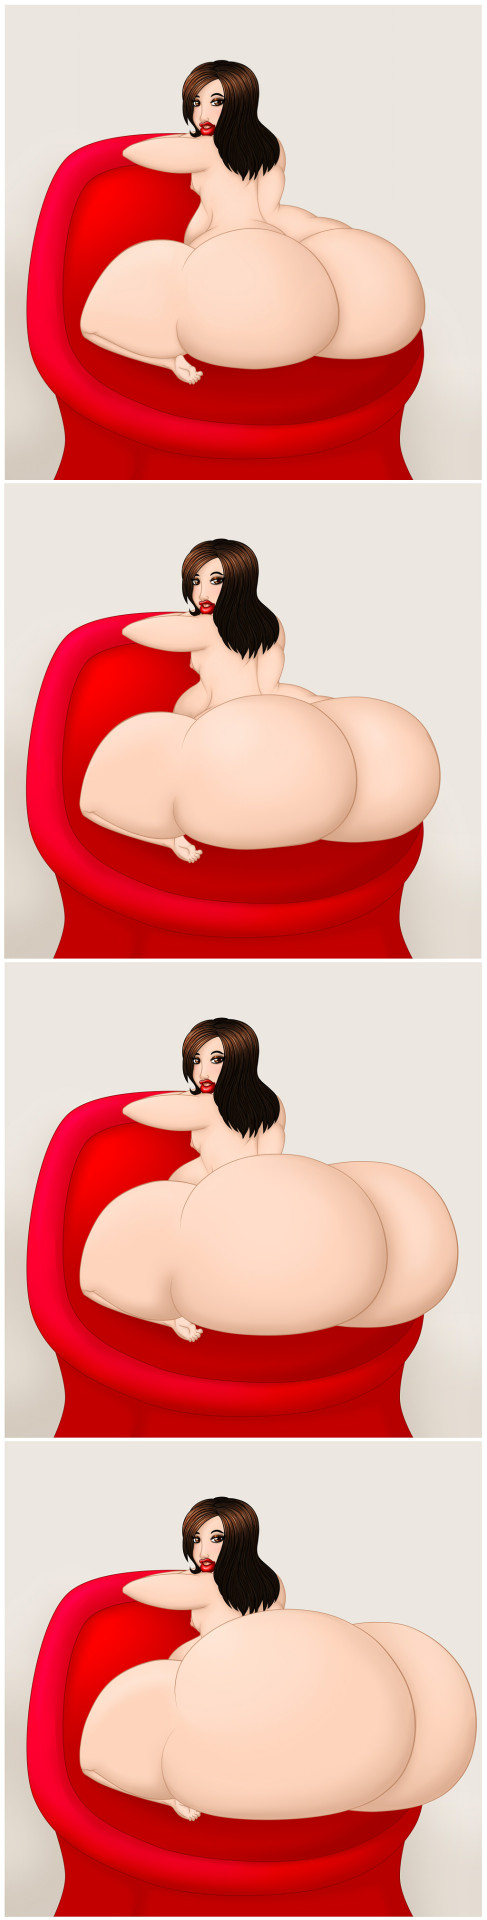   Butt expansion of a curvy trap  Get the full HD versions of each picture here And